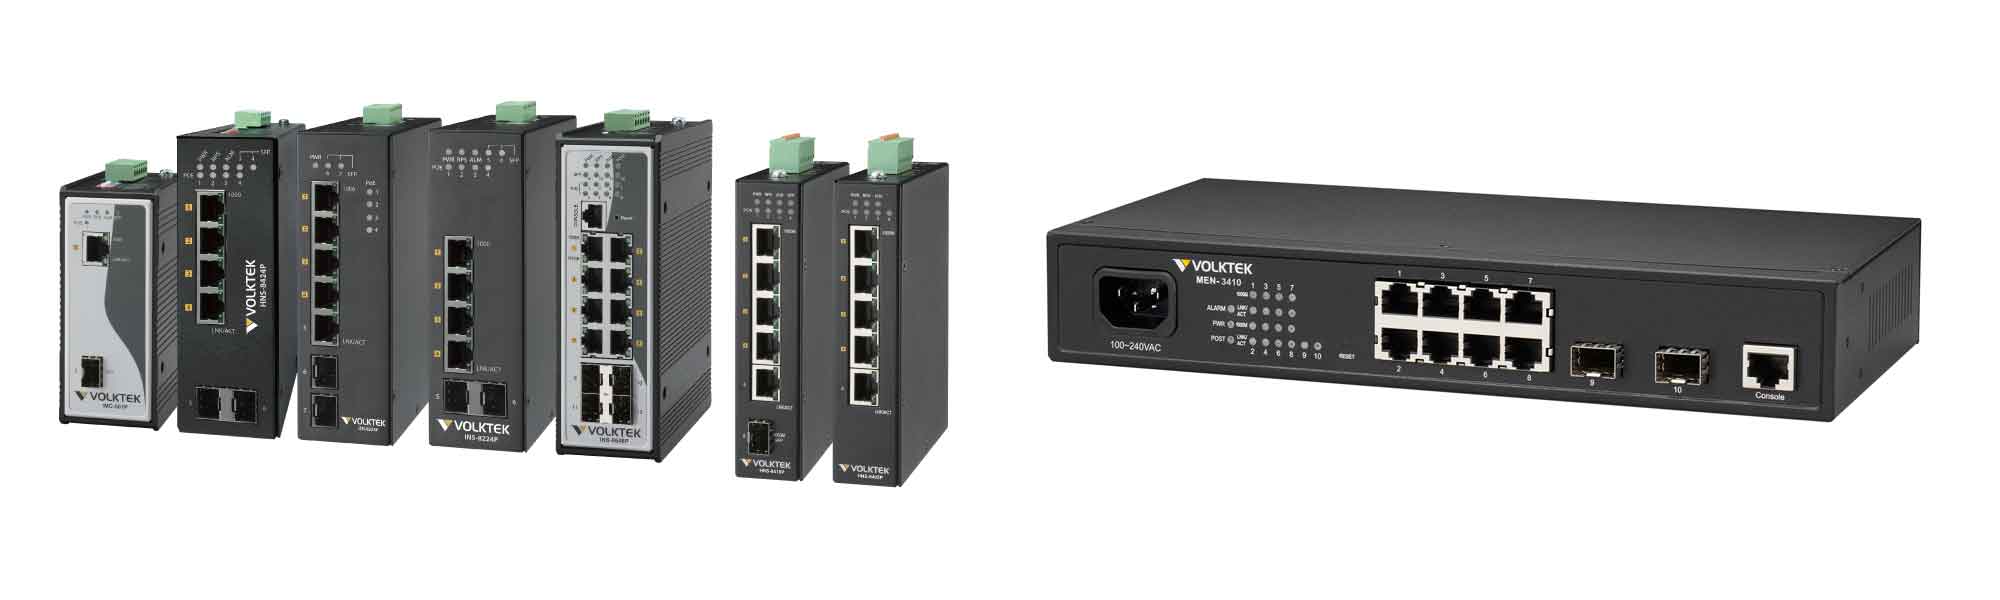 Networking Solutions | Novatec Europe srl